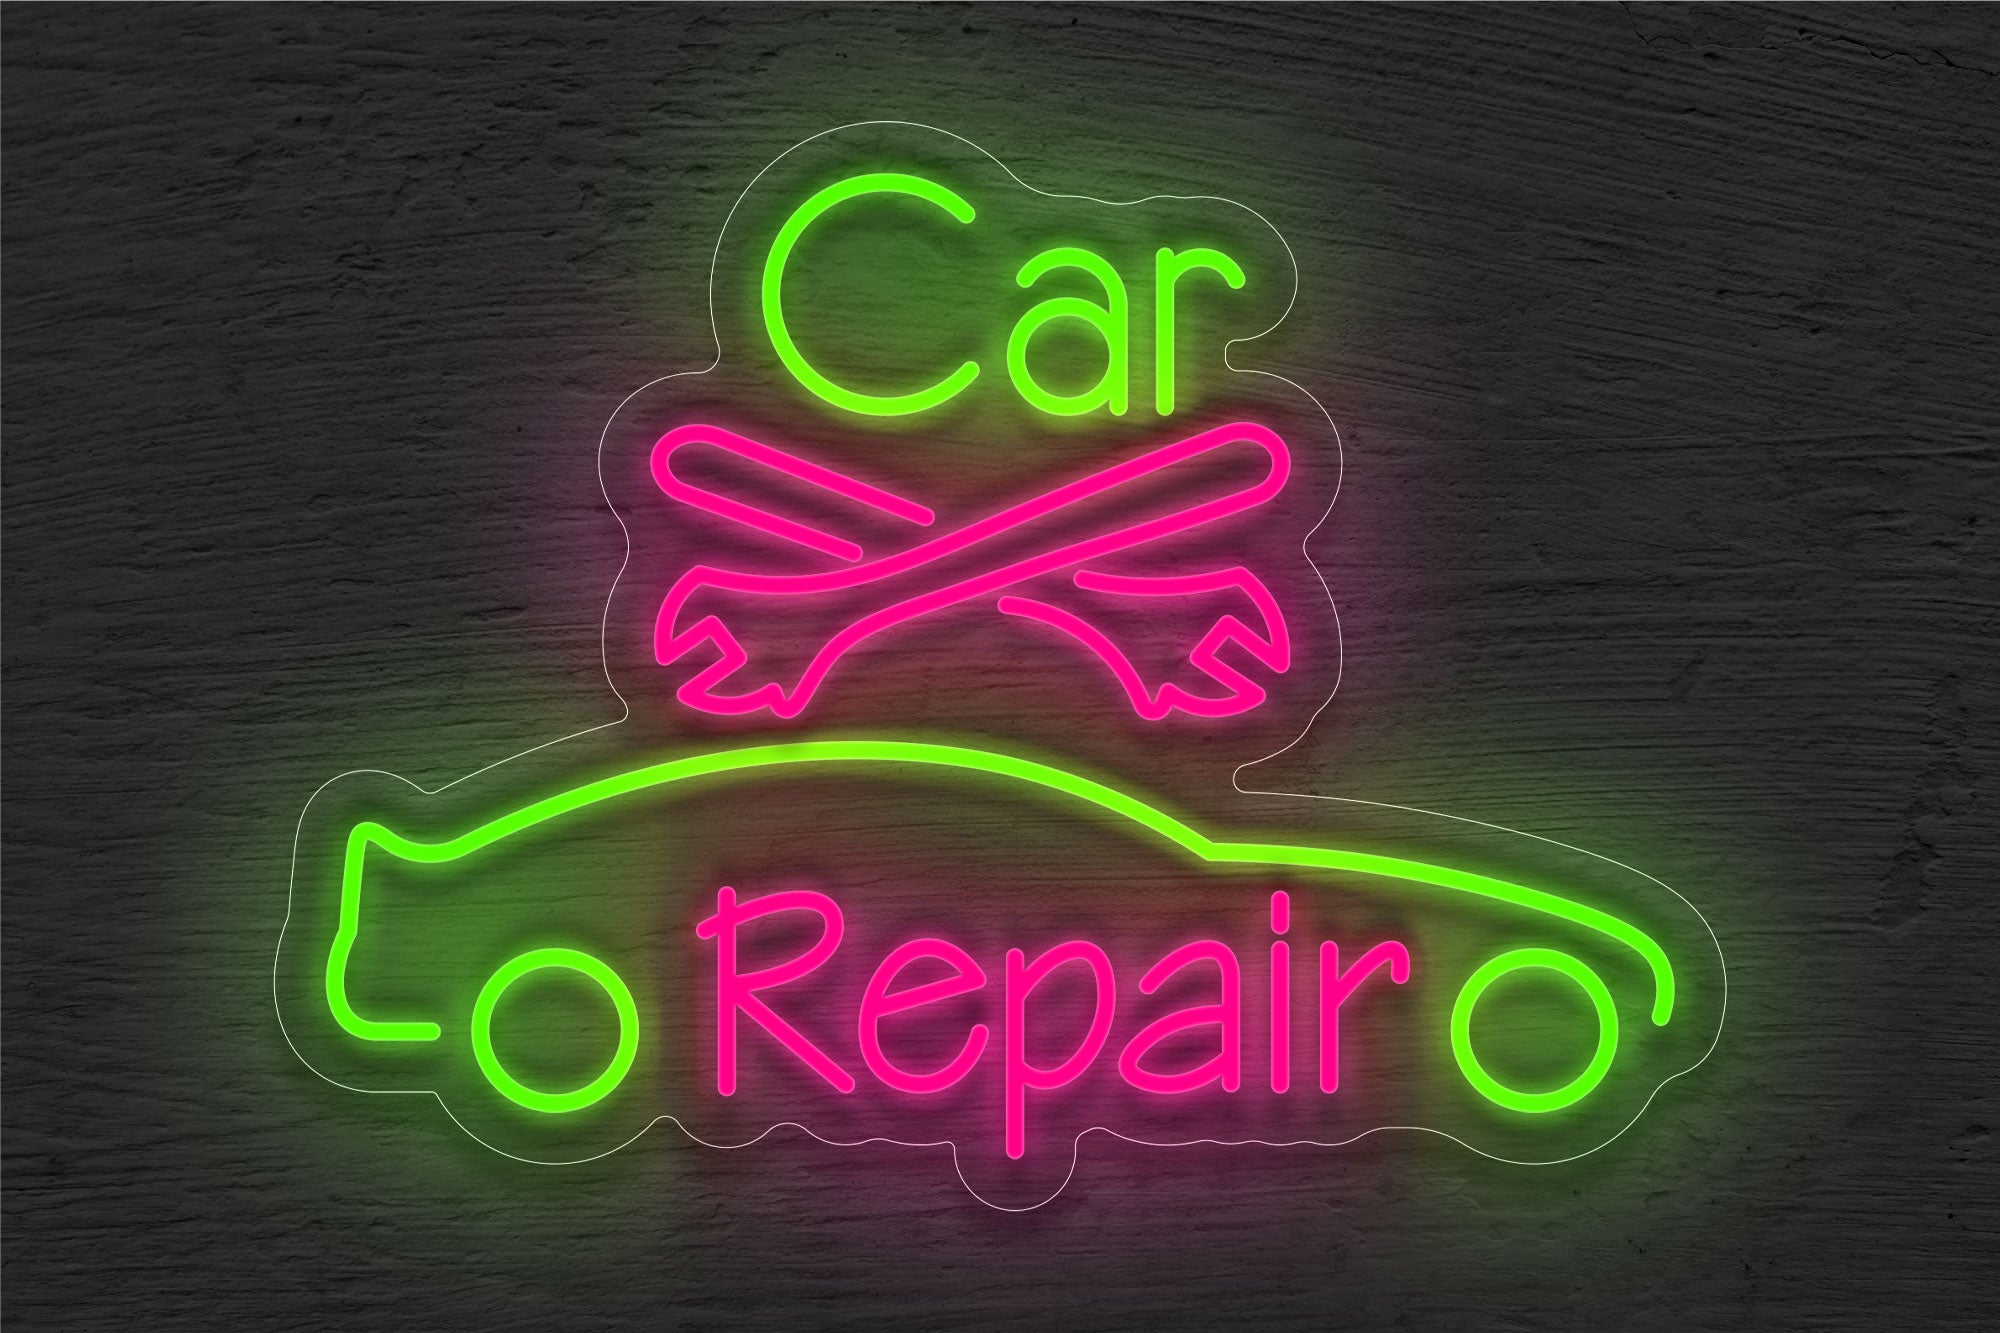 AUTO ACCESSORIES LED Sign in Red, Neon Look